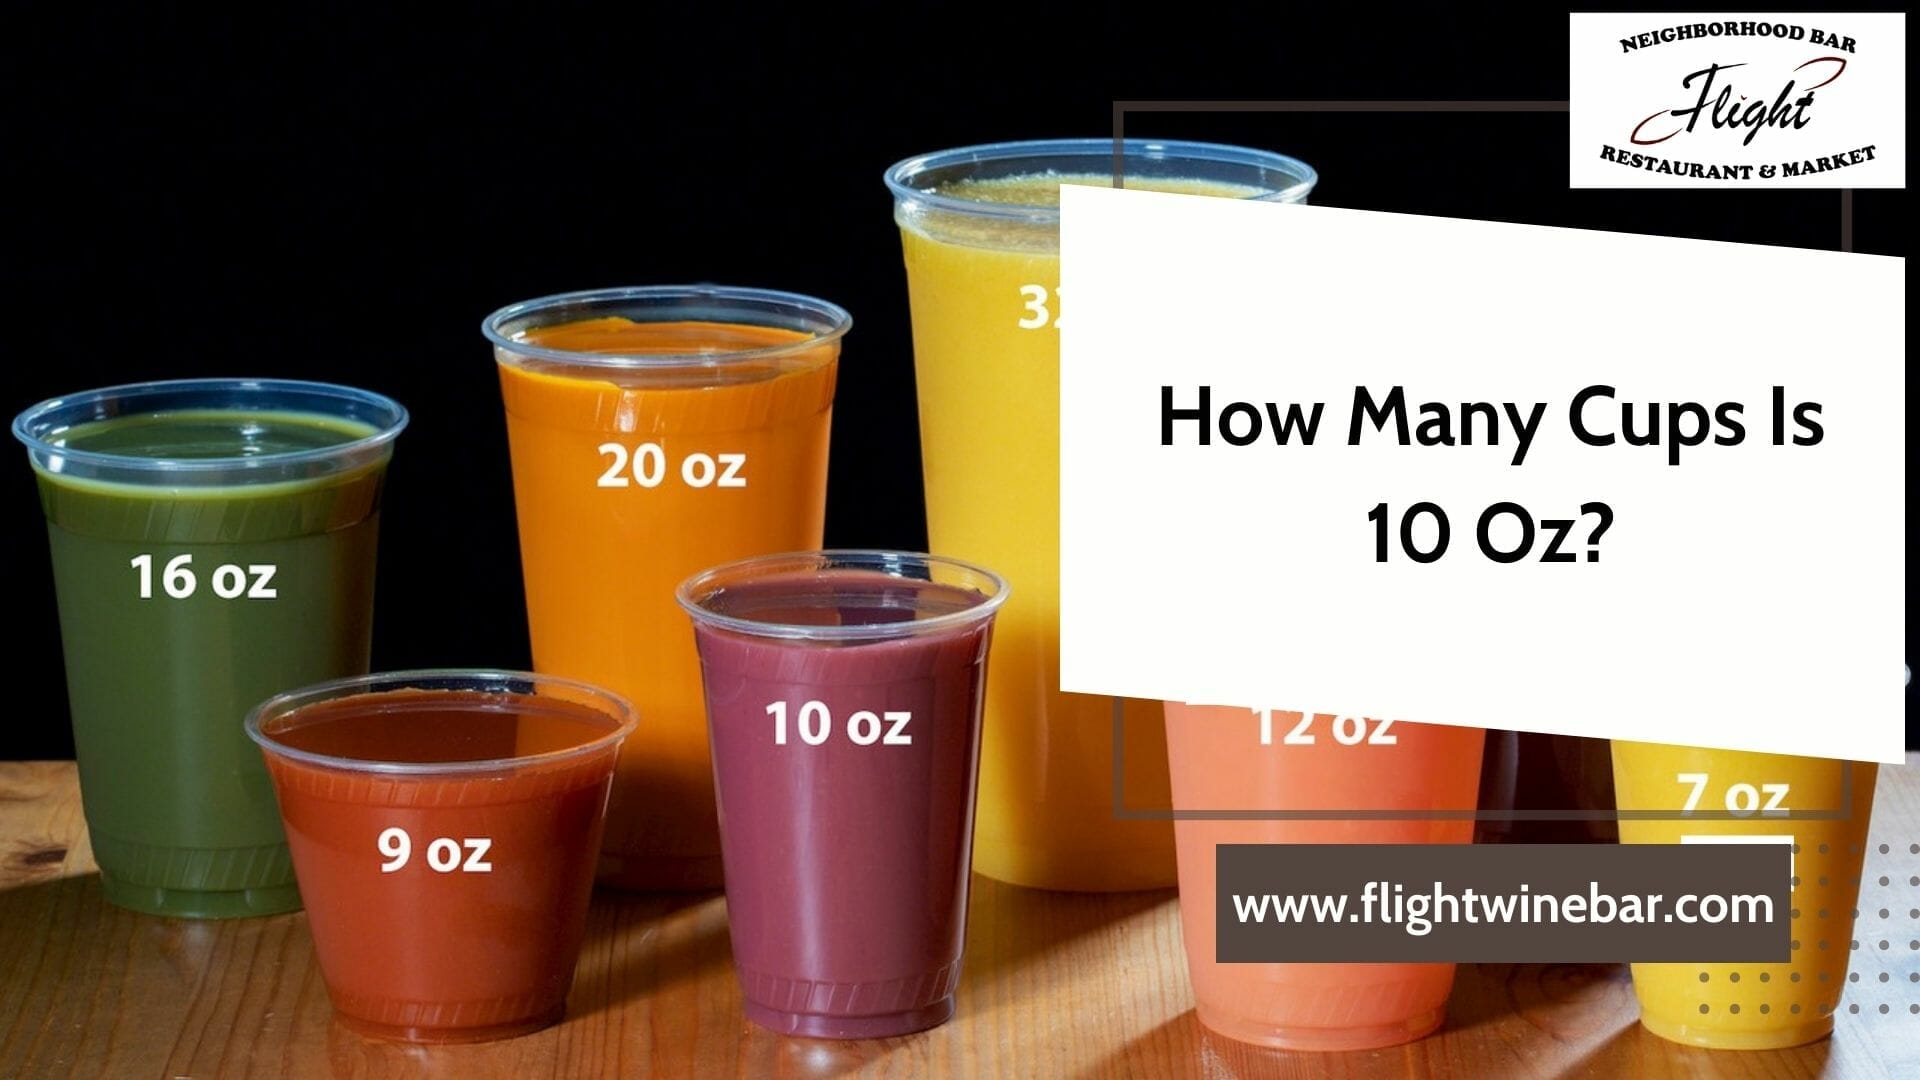 How Many Cups Is 10 Oz